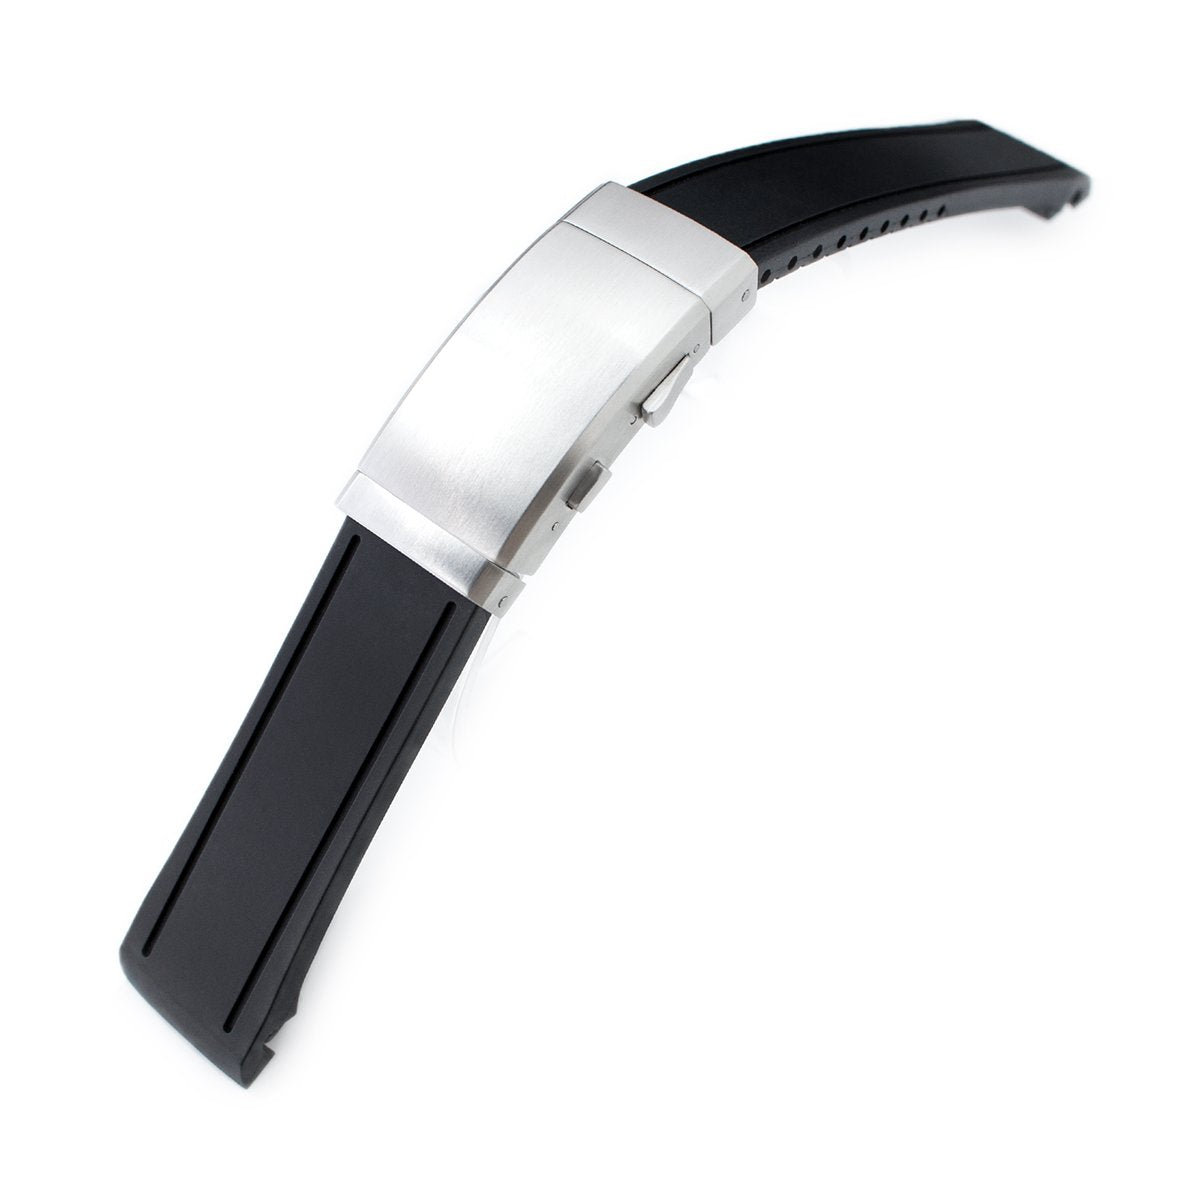 Strapcode MiLTAT Ratchet Buckle Clasp is an ideall Wetsuit watch band  buckle.